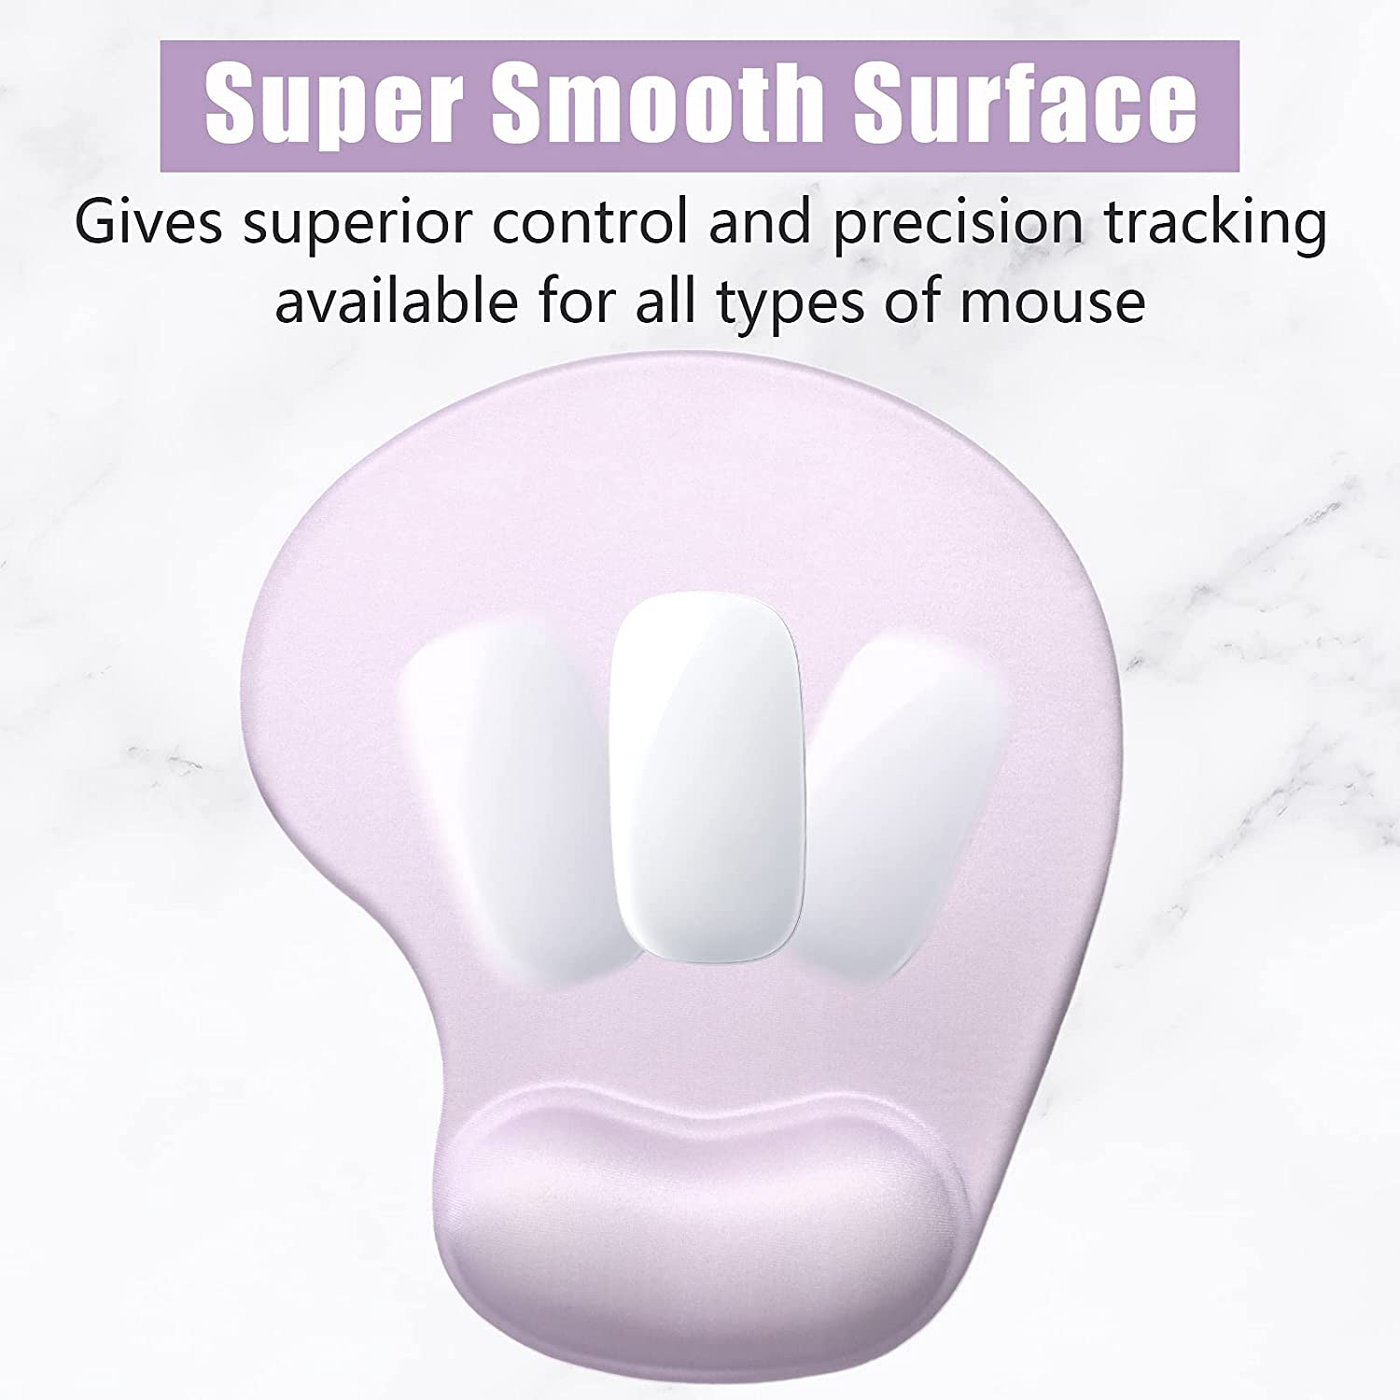 Hsurbtra Ergonomic Mouse Pad with Wrist Rest Support, Gel Mouse Pads with Non-Slip PU Base, Pain Relief Memory Foam Mousepad for Laptop PC, Cute Office Supplies Desk Decro Accessories Vanilla Purple